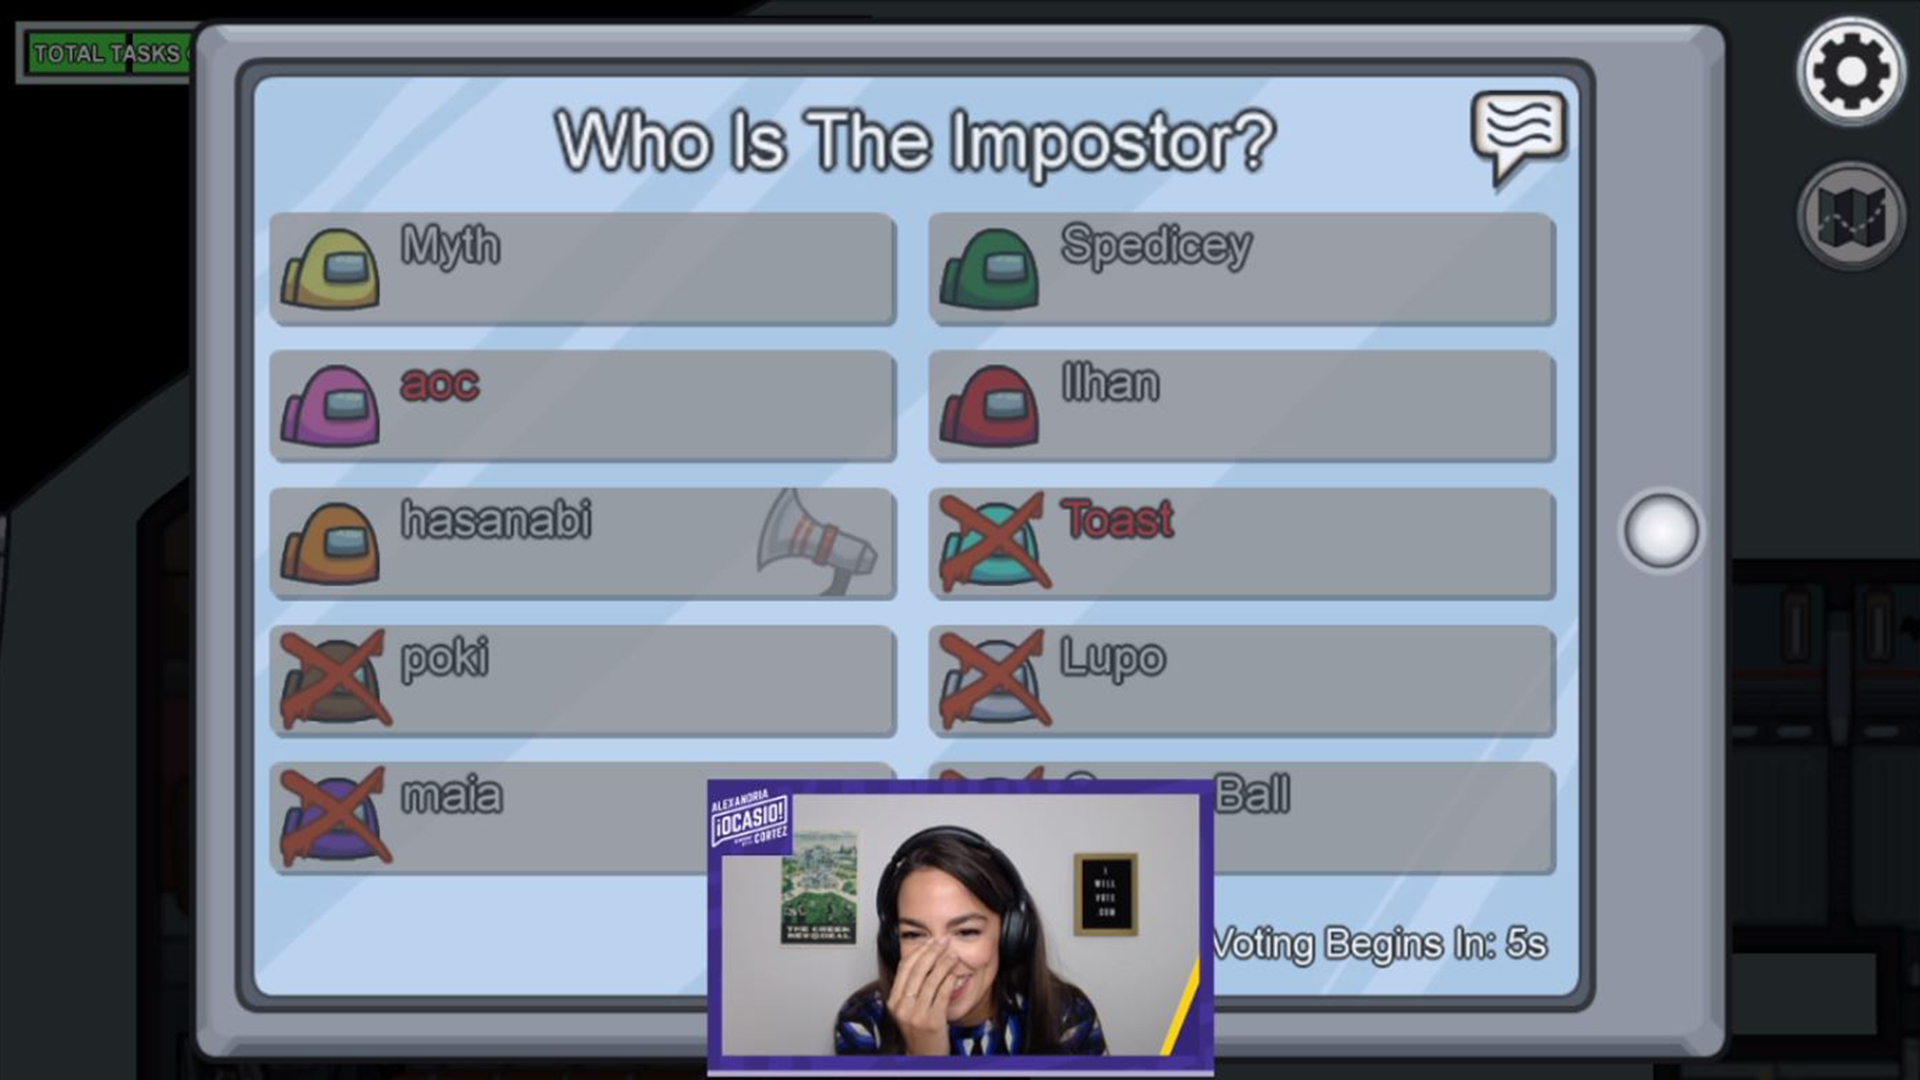 Who Is Imposter - Play Who Is Imposter Game online at Poki 2